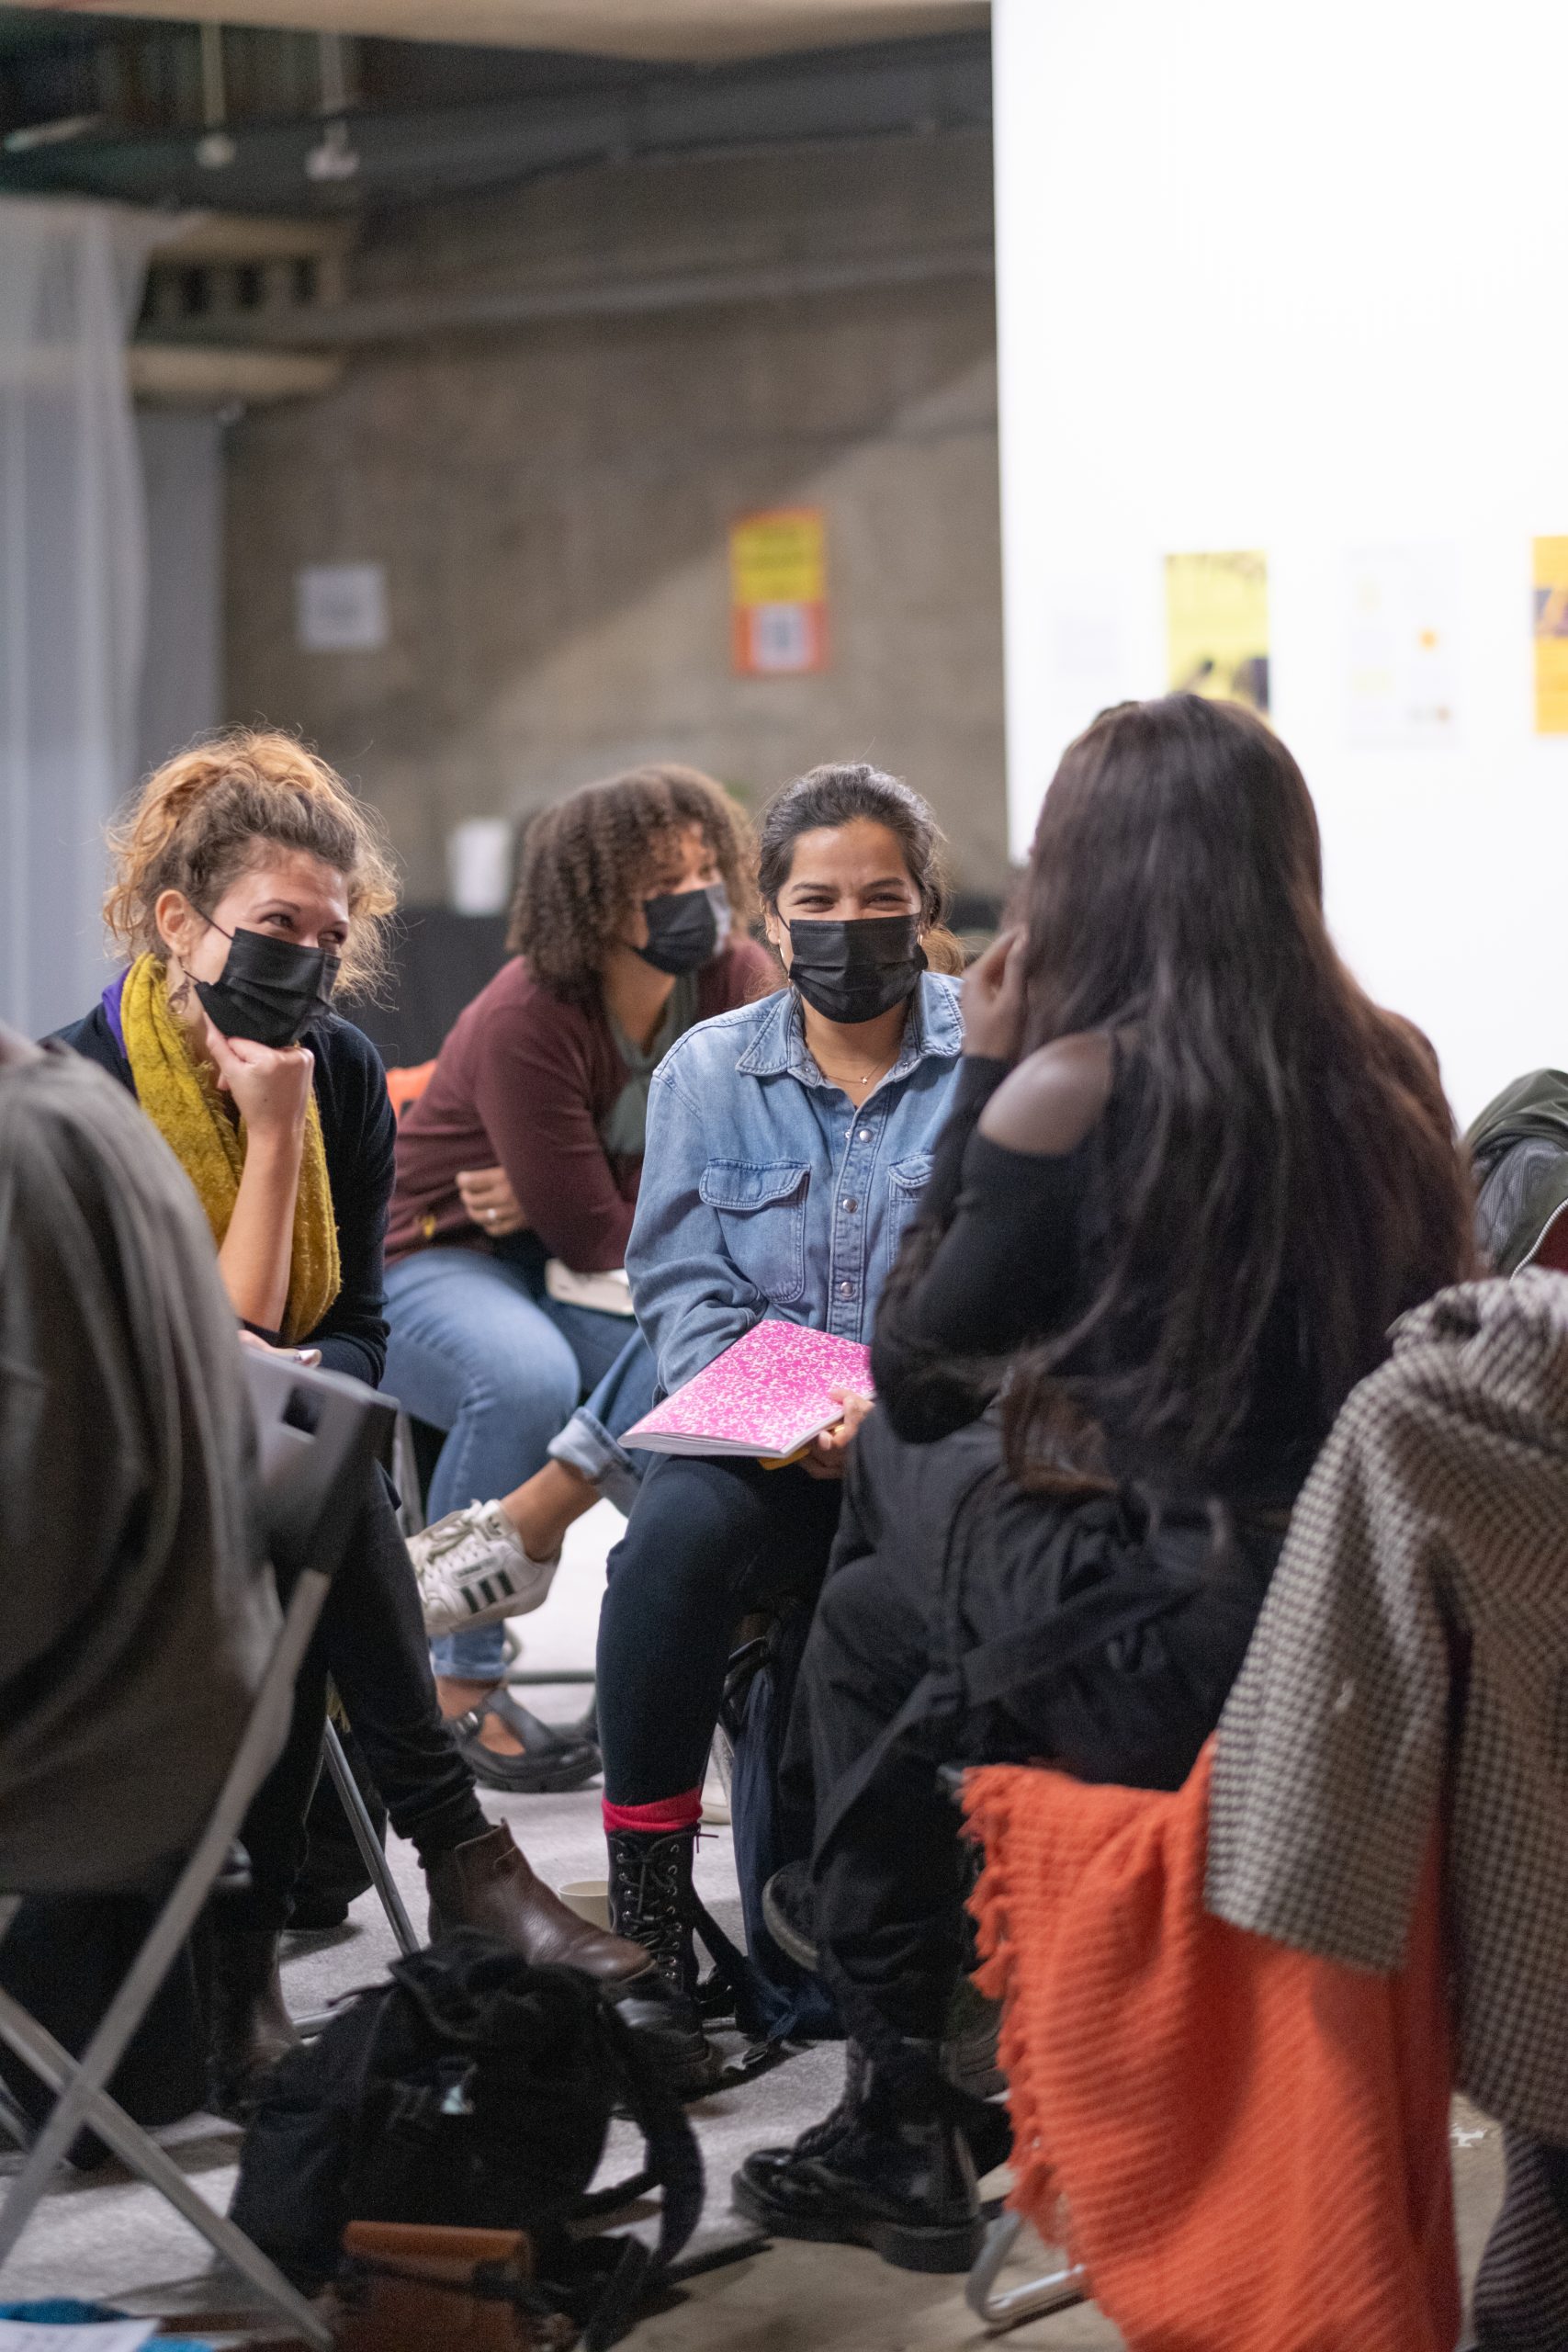 A diverse group of people in discussion, sitting down, wearing face masks.